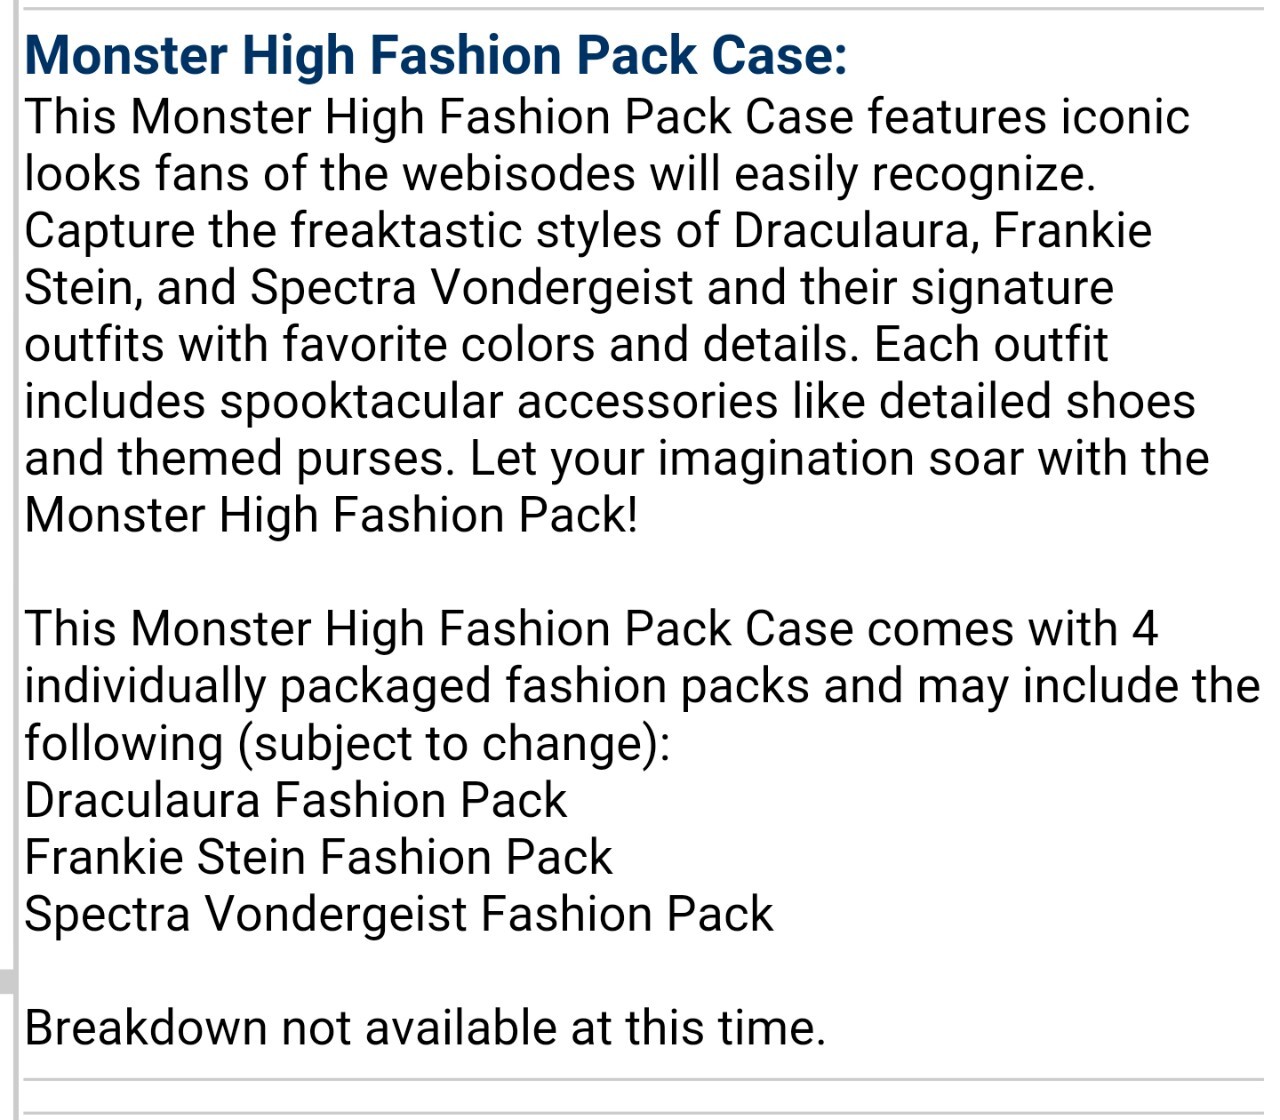 momdusa:

riggles323rd:

stephanemiroux:

peppapigvevo:

muse9429:

The fashion pack screenshot floating around got me curious so I checked the website in the url (entertainmentearth.com) and found some interesting things. I took screen shots of the descriptions of anything saying fashion pack and a Frankie I hadn’t heard about. It looks like Mattel is interested in fashion packs again. (with the timing and such I’m assuming they’re coming from the reboot) the availability dates are May and June 2016.

interesting to note that spectra is explicitly listed in one of those descriptions! so its safe to assume that she wont be replaced by ari

I can’t believe we’re getting fashion packs back. Now I just need Abbey to escape budget line hell.

This is my thinking…We won’t be seeing Abbey or Spectra or Ghoulia at all this year. Sad. Yup!
Perhaps Spectra’s name in the description was just a placeholder for Ari Hauntington. 
What we will be seeing: Frankie, Draculaura, Clawdeen, Cleo and Lagoona as our 5 core ghouls. Mattel will introduce us to Moanica Yelps and Ari Hauntington to replace Ghoulia and Spectra respectively to test whether or not these NEW characters sell better. 
Like everyone else I’m happy fashion packs are back on the table…let’s just hope they’re not as basic looking as the outfits the core reboot ghouls are sporting.


*a-hem* Moanica D’Kay*I wonder if Moanica will have fewer brain details cause that was the thing that seemed to make parents go “ew” (well, I’ve seen it a few times). And I was hoping for some fashion packs that anyone could wear (like the little Barbie packs) but it sounds like they’ll be for the individual characters. You know though? We’re getting accessories. I like accessories. I’m just gonna wait and see about the clothes